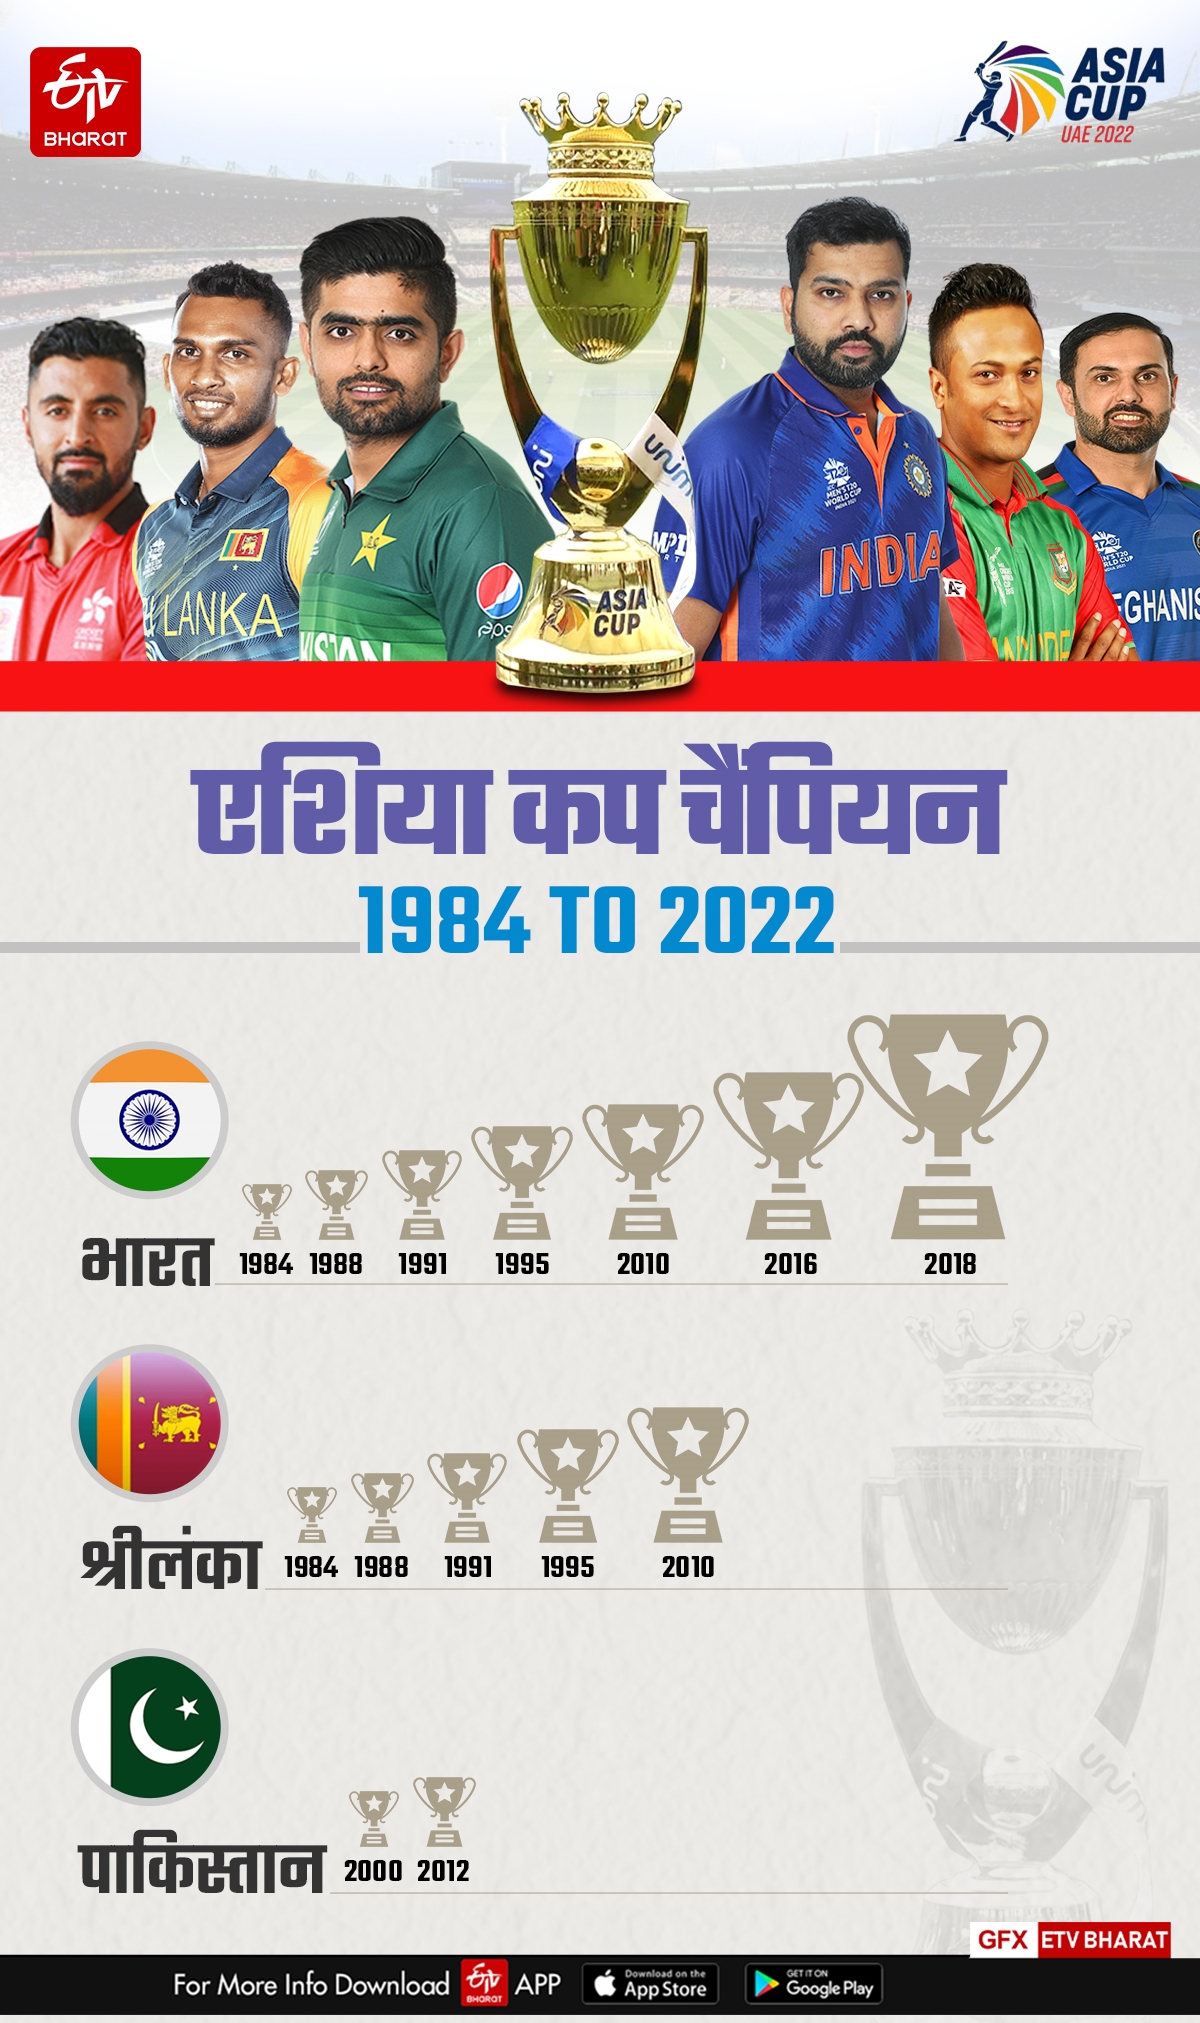 Asia Cup Cricket winners